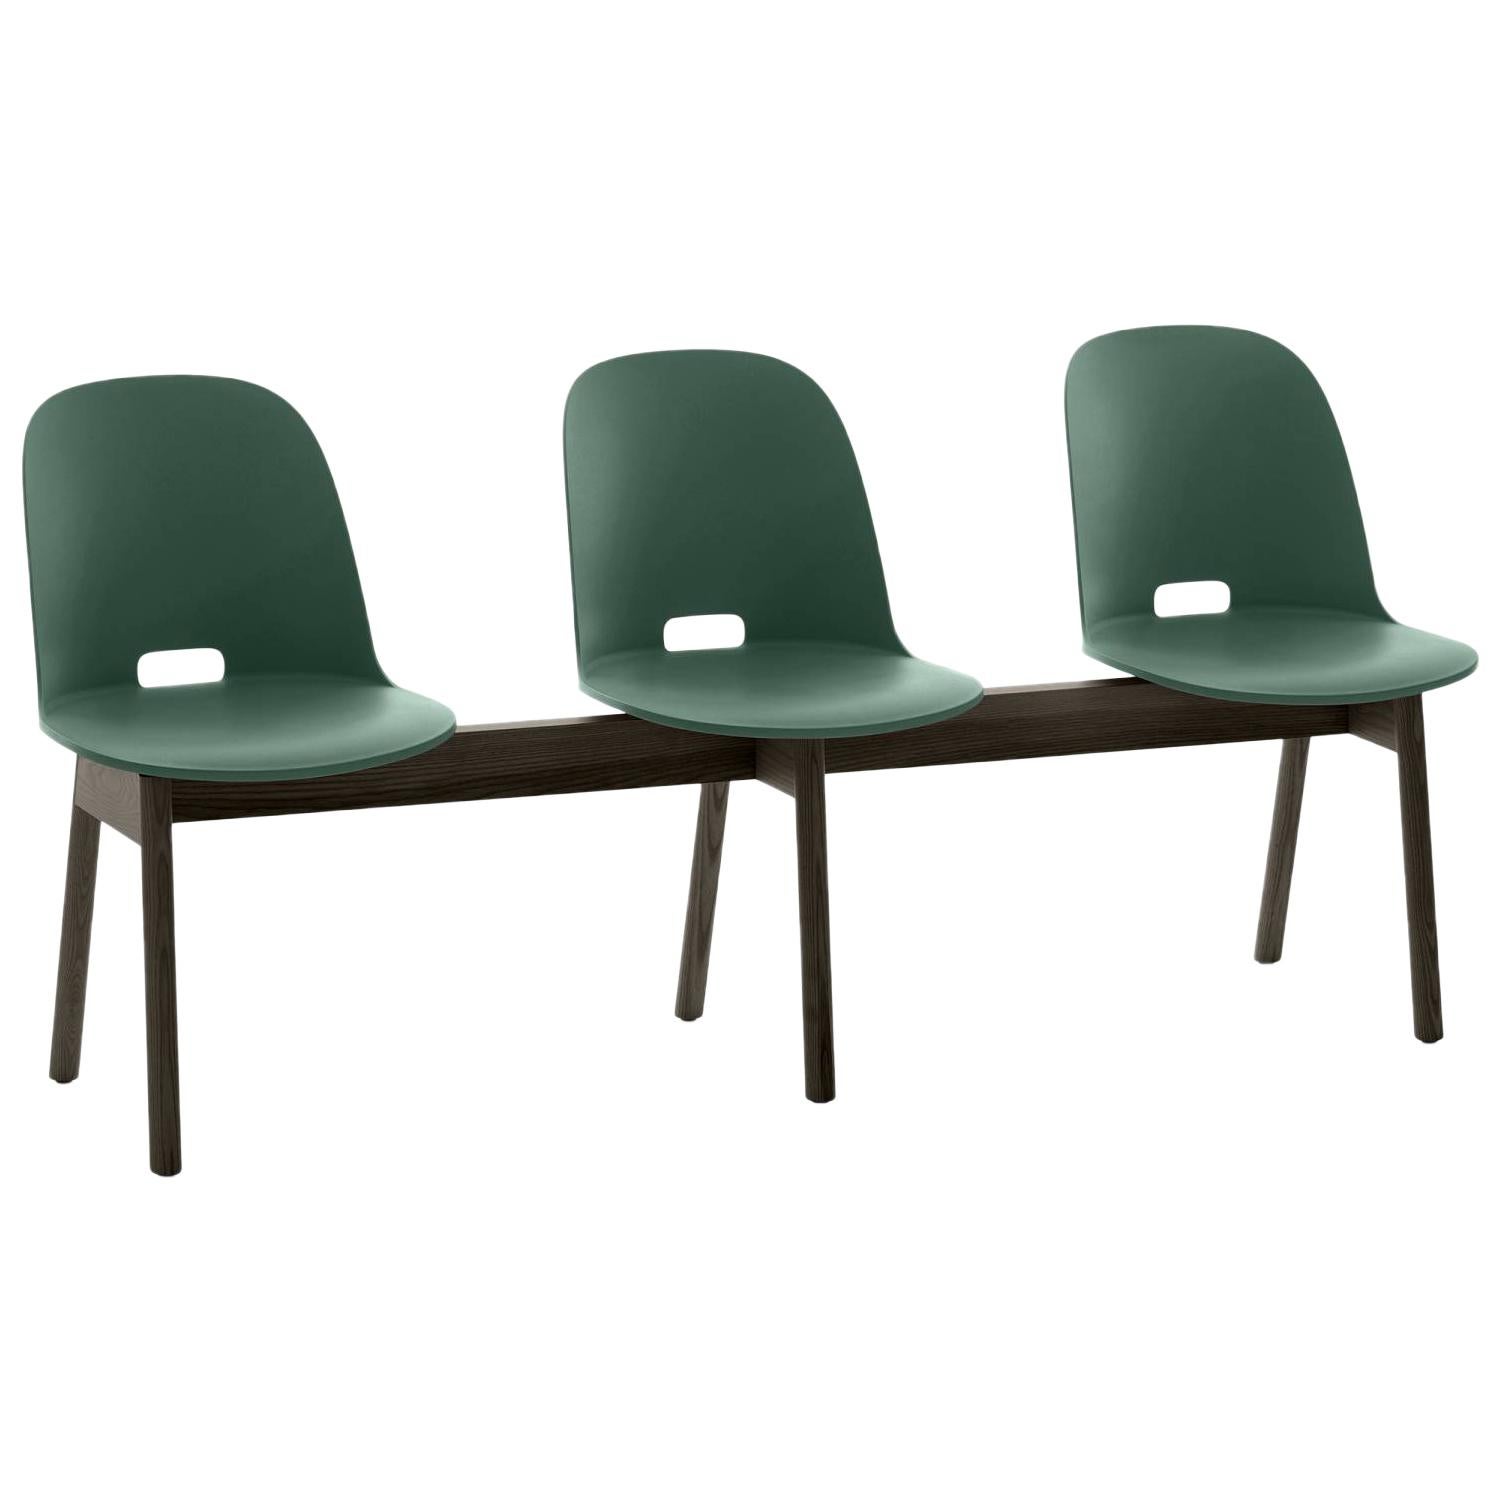 Emeco Alfi 3-Seat Bench in Green and Dark Ash with High Back by Jasper Morrison For Sale